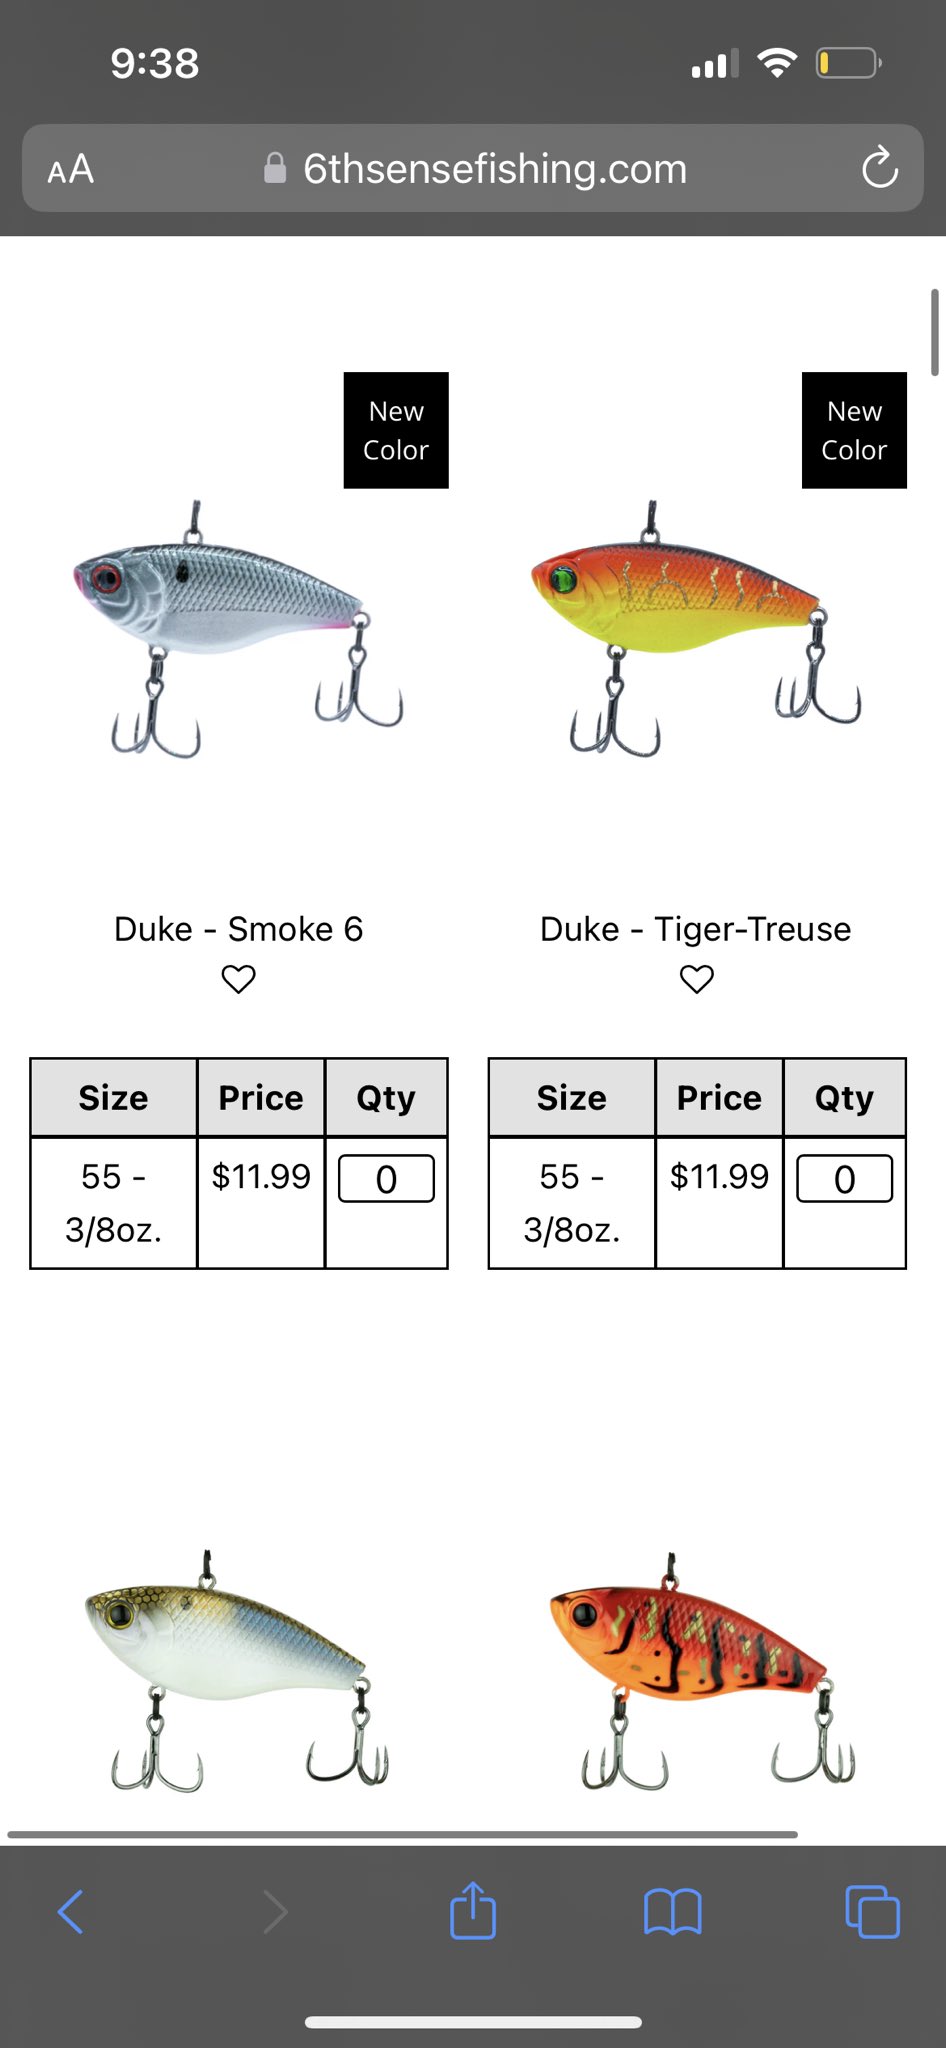 6th Sense Fishing on X: For the most finicky fish, the Duke 55